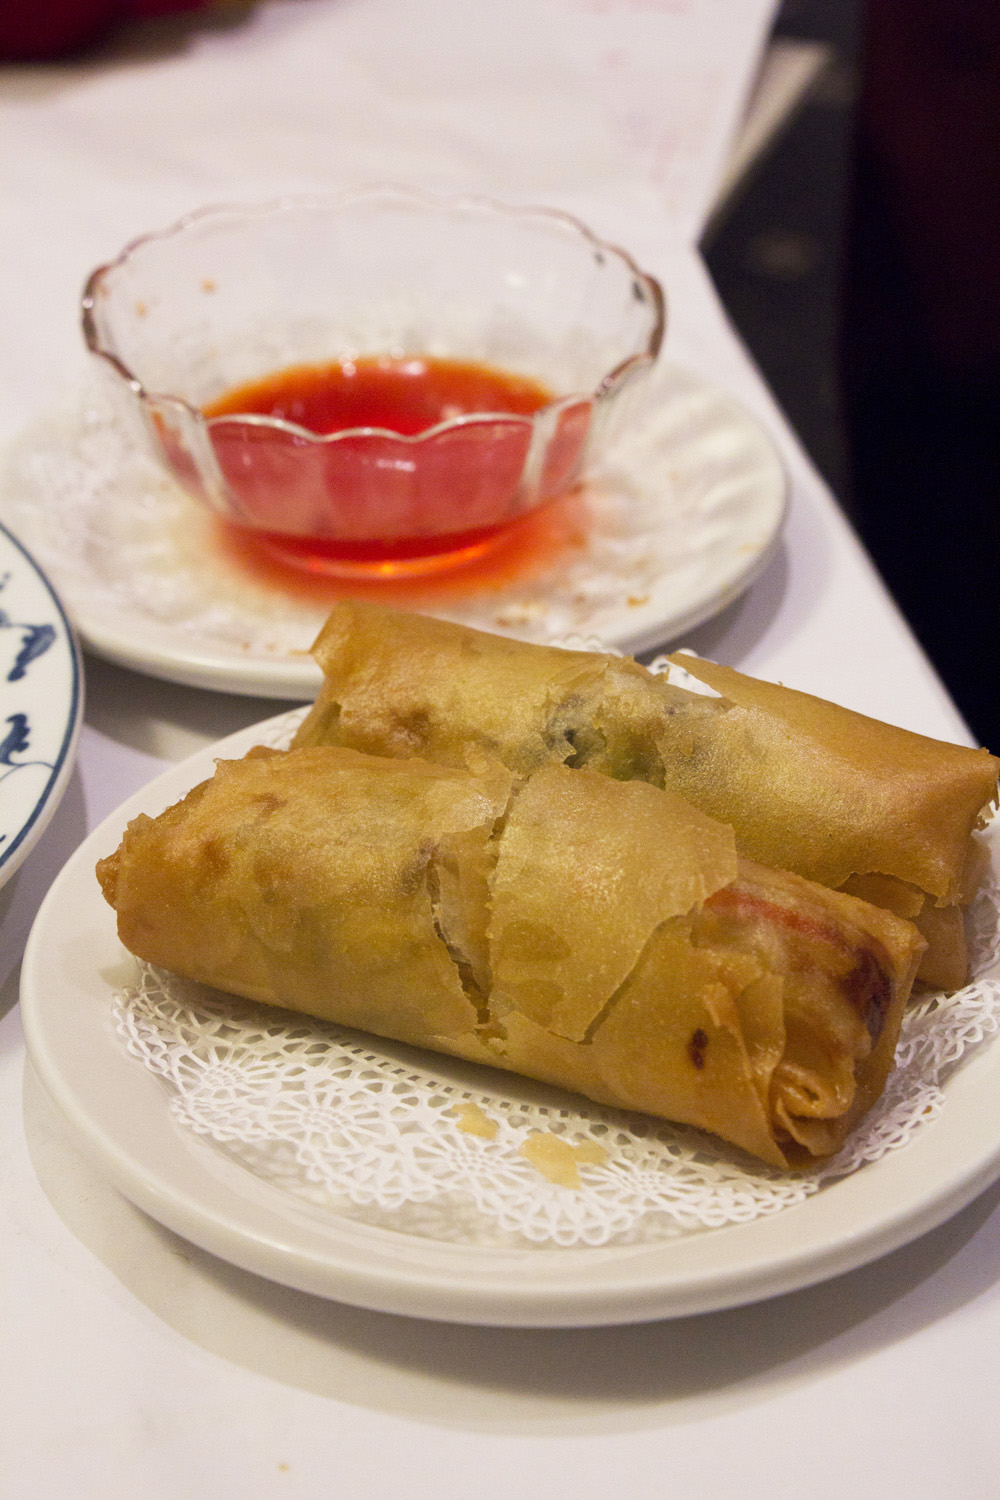 Spring roll with dipping sauce - Yank Sing | San Francisco